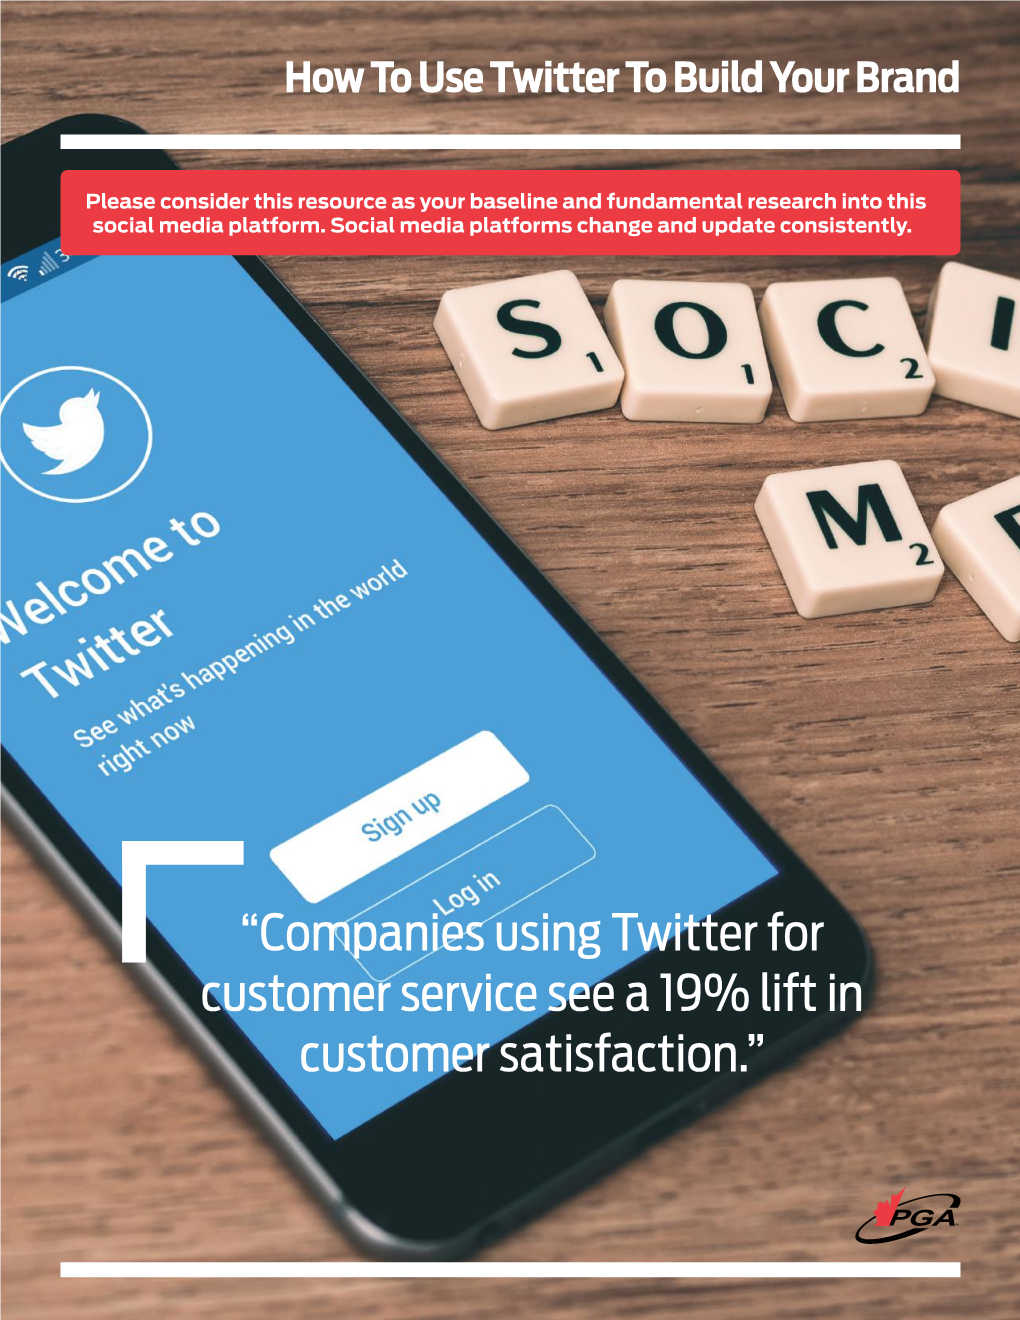 Companies Using Twitter for Customer Service See a 19% Lift in Customer Satisfaction.”